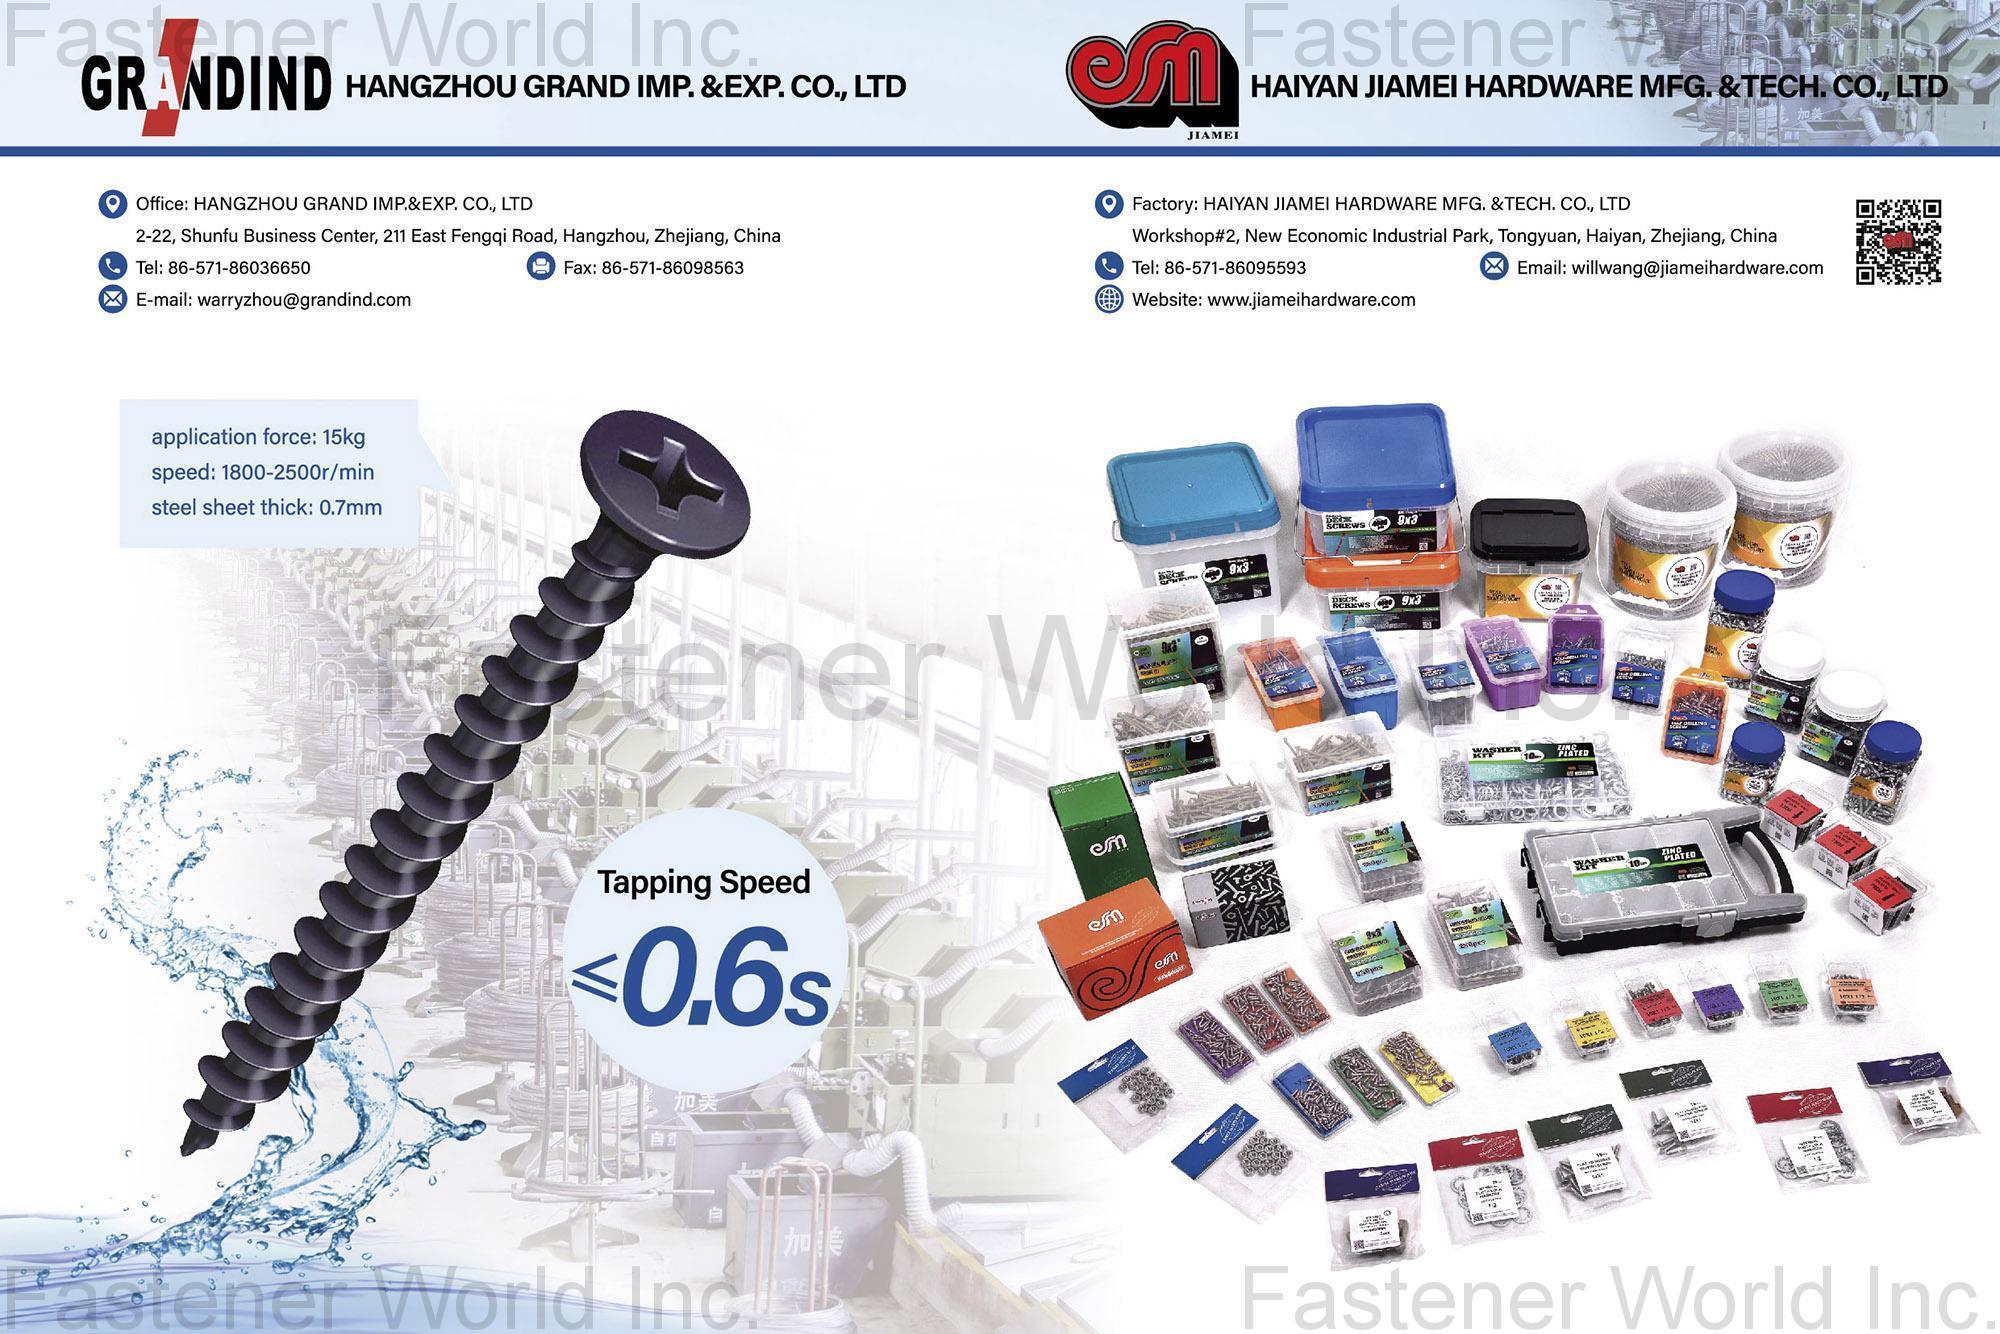 Hangzhou Grand Imp.& Exp. Co., Ltd. (Haiyan Jiamei Hardware) , Fastener: Screws, Bolts, Nuts, Washer... Hardware & Shapes: Braces, Hinge, Clamps, Tube, Sheets... Security Products: Locks, Hasps... DIY Packaging: Paper Box, Poly Bags, Plastic Drum, Plastic Jar, Plastic Box, Kit Package, Double Blister, Blister Card...